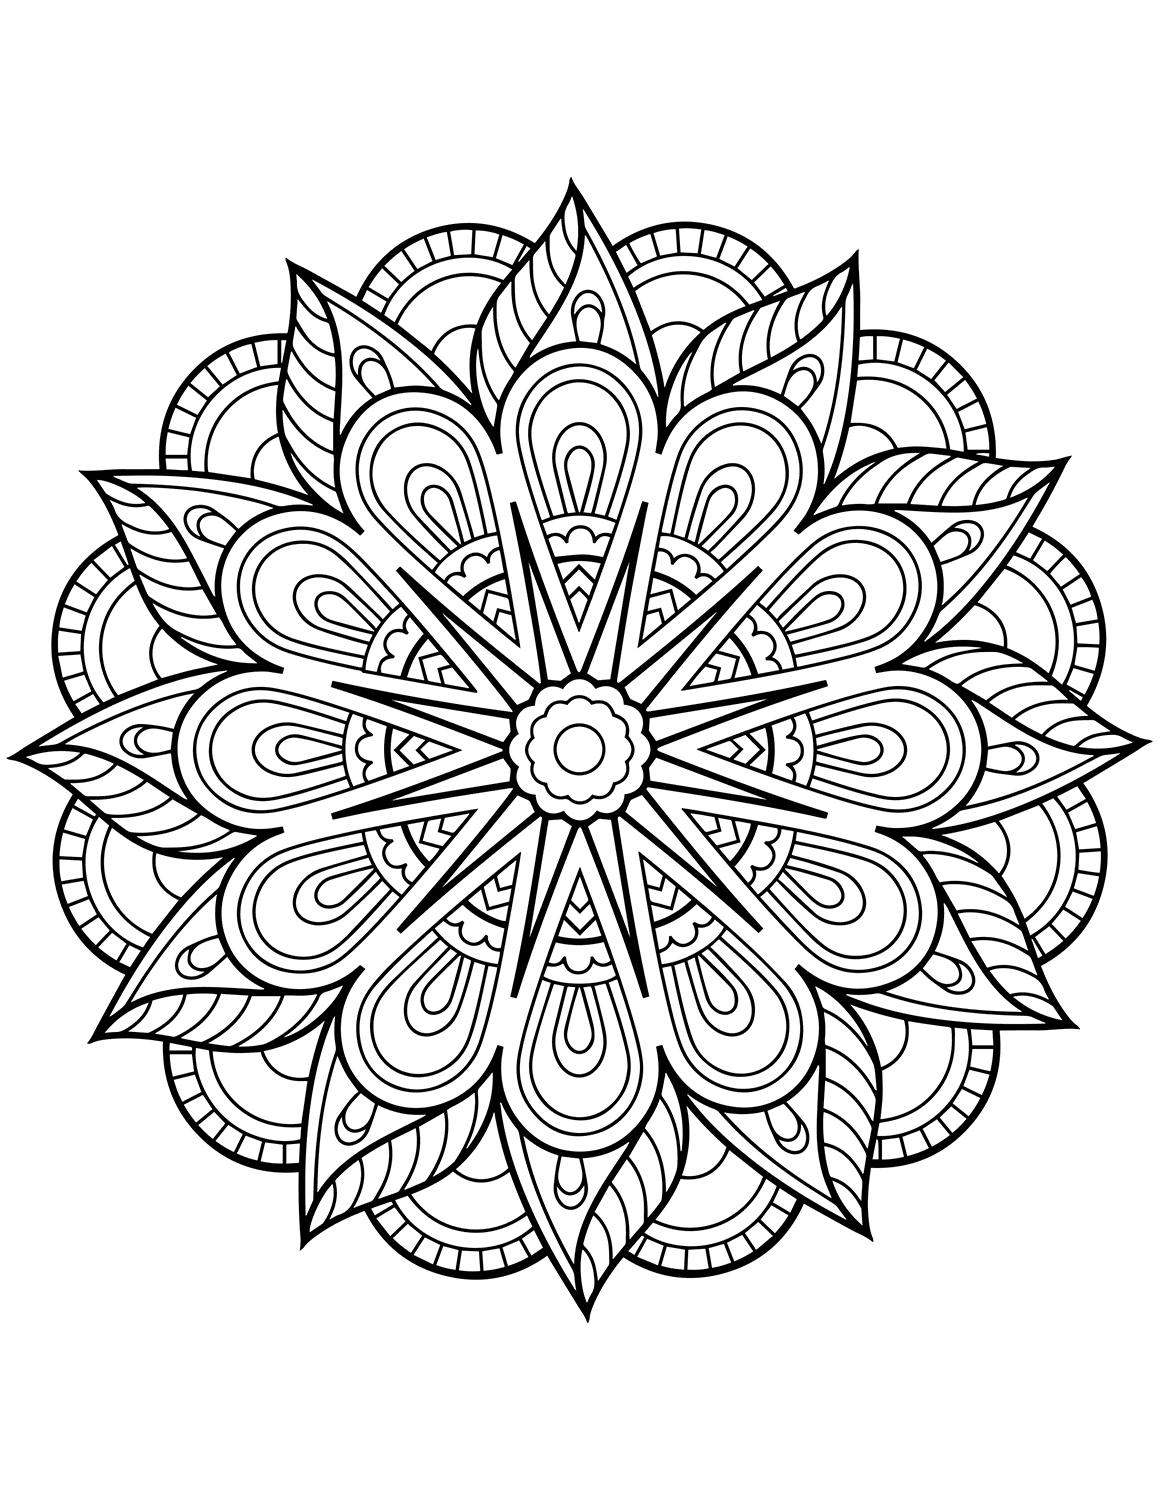 Download Flower Mandala Coloring Pages - Best Coloring Pages For Kids